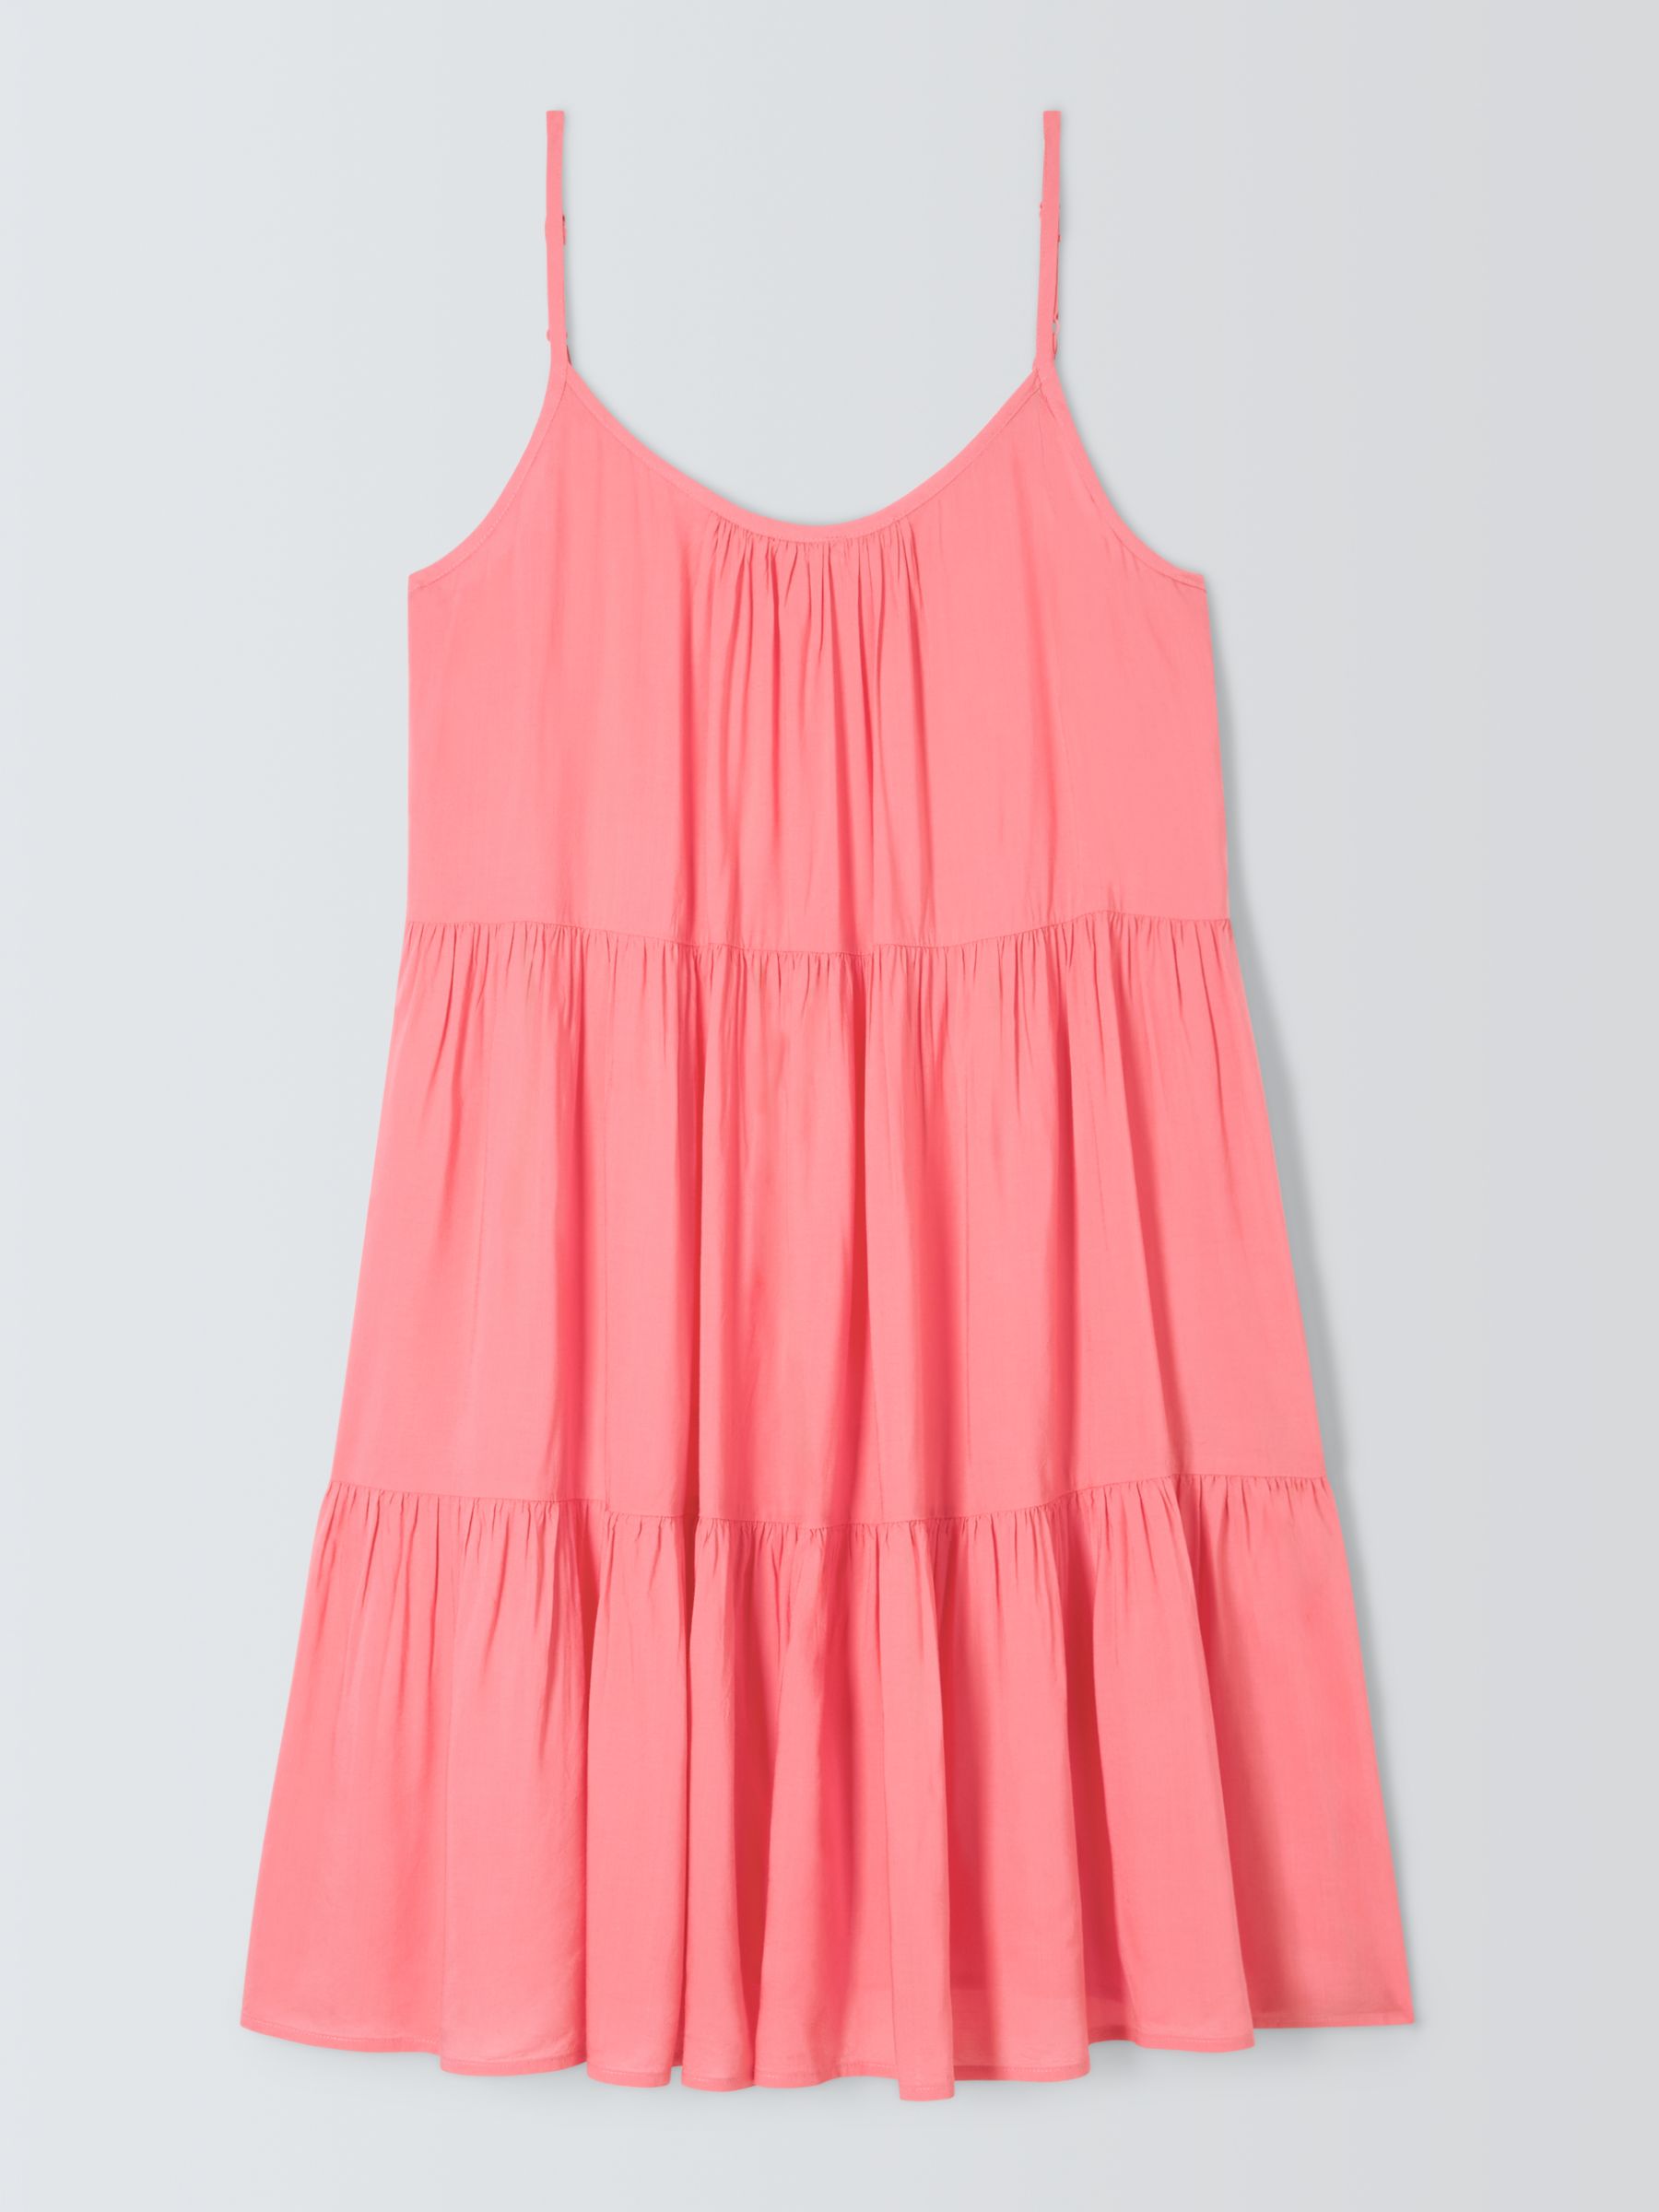 Buy John Lewis ANYDAY Tiered Mini Beach Dress Online at johnlewis.com